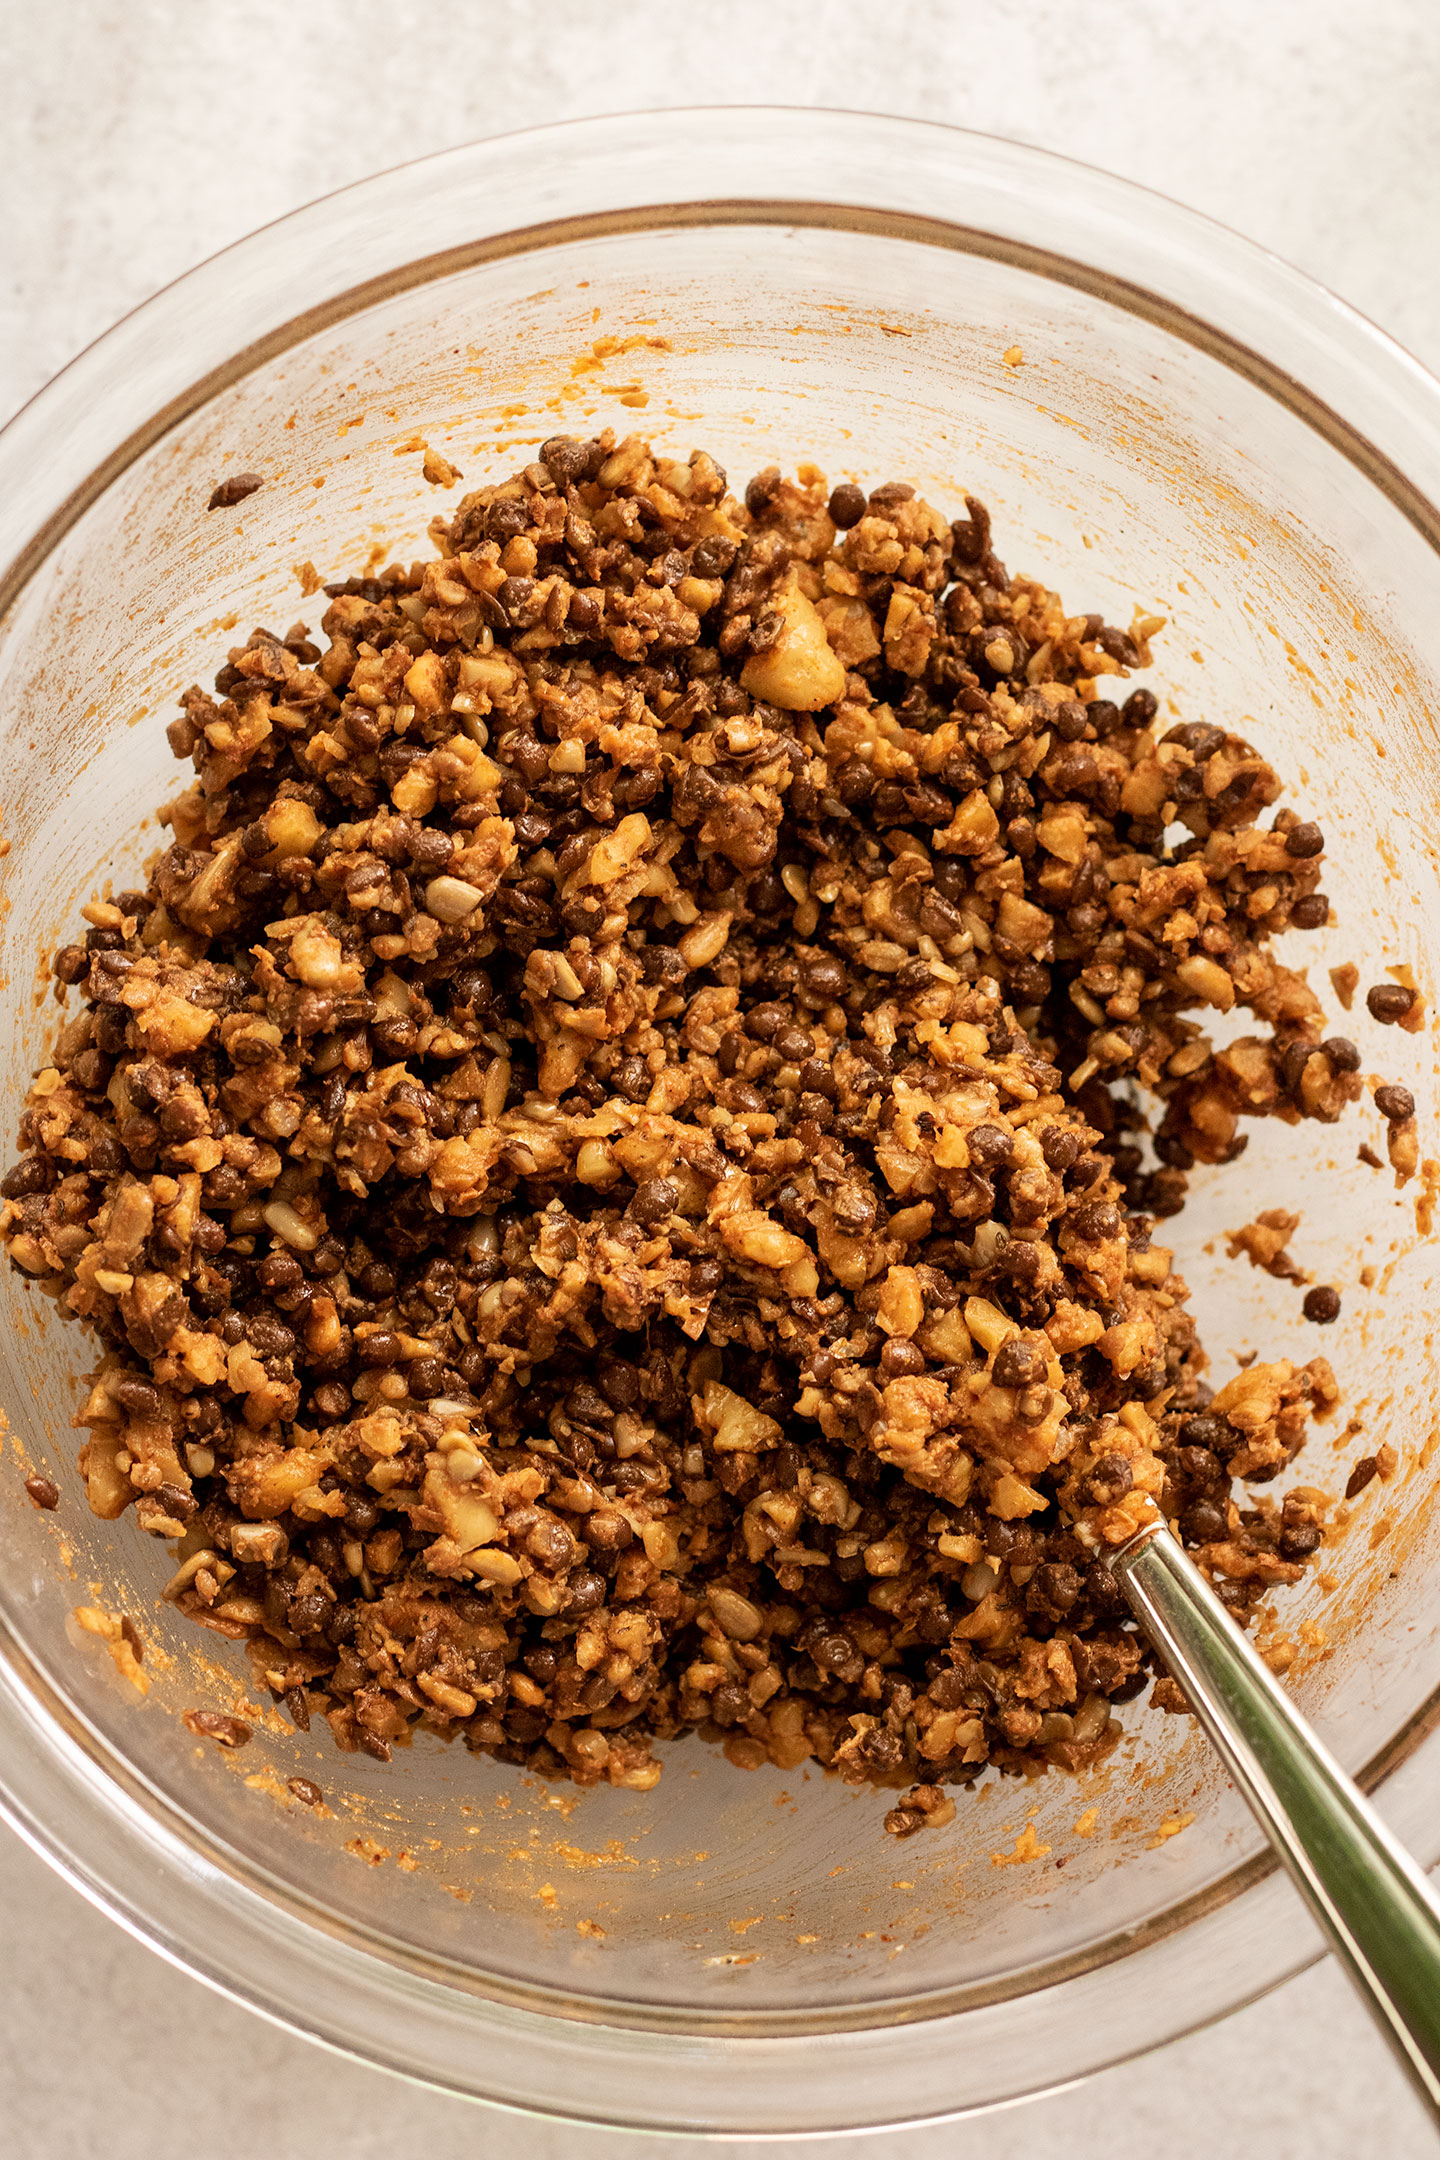 Tossed lentil, walnuts and chopped sunflower seeds mixed with spices in a bowl.